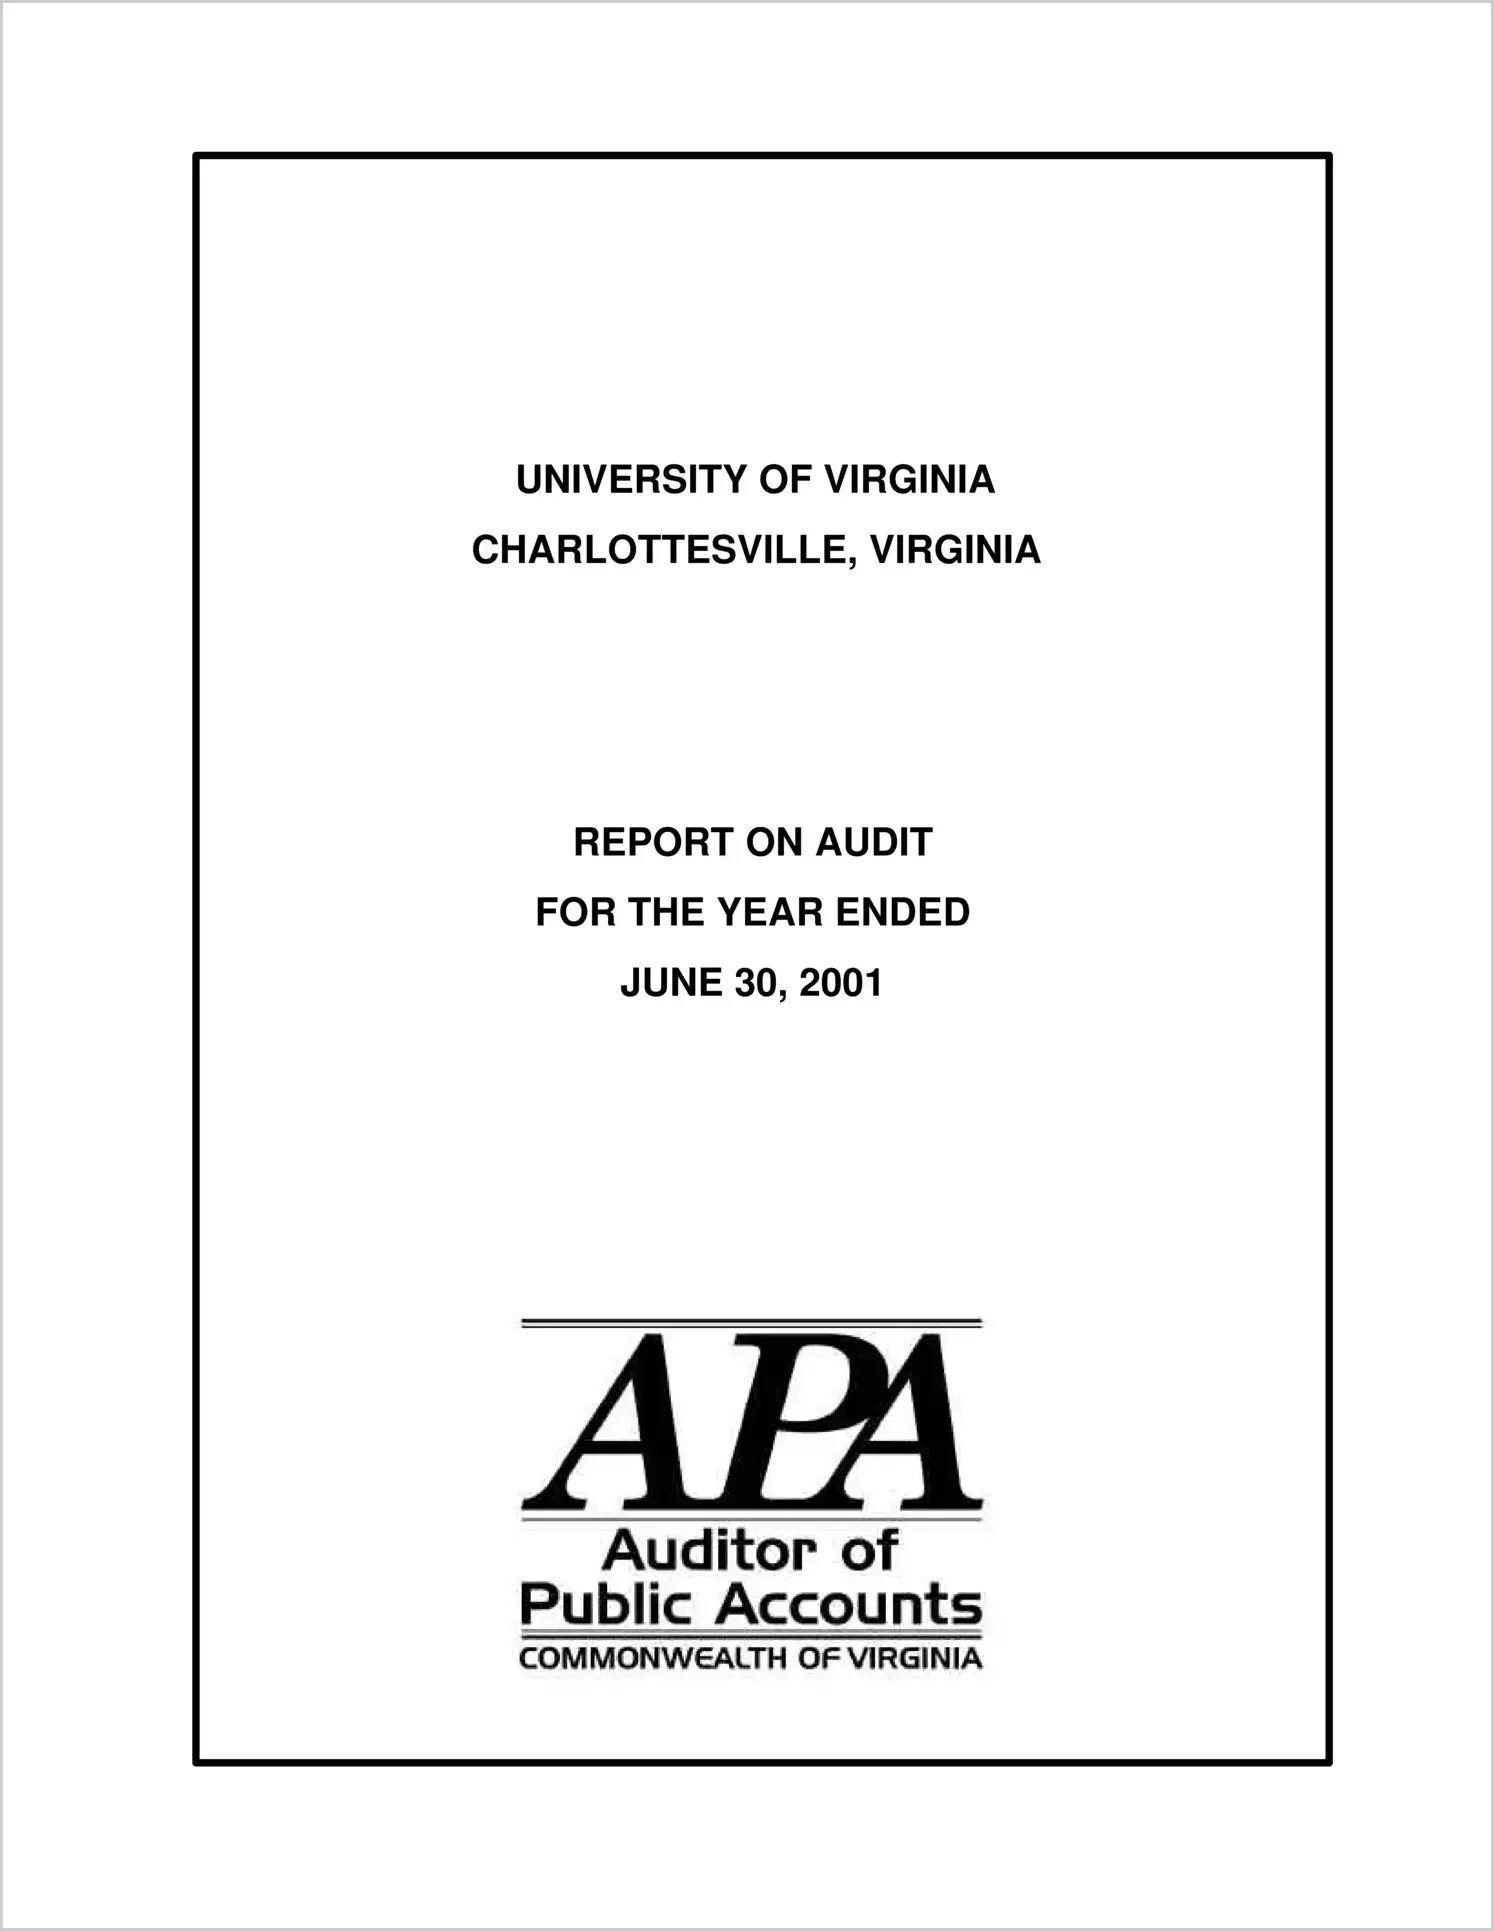 University of Virginia for the year ended June 30, 2001